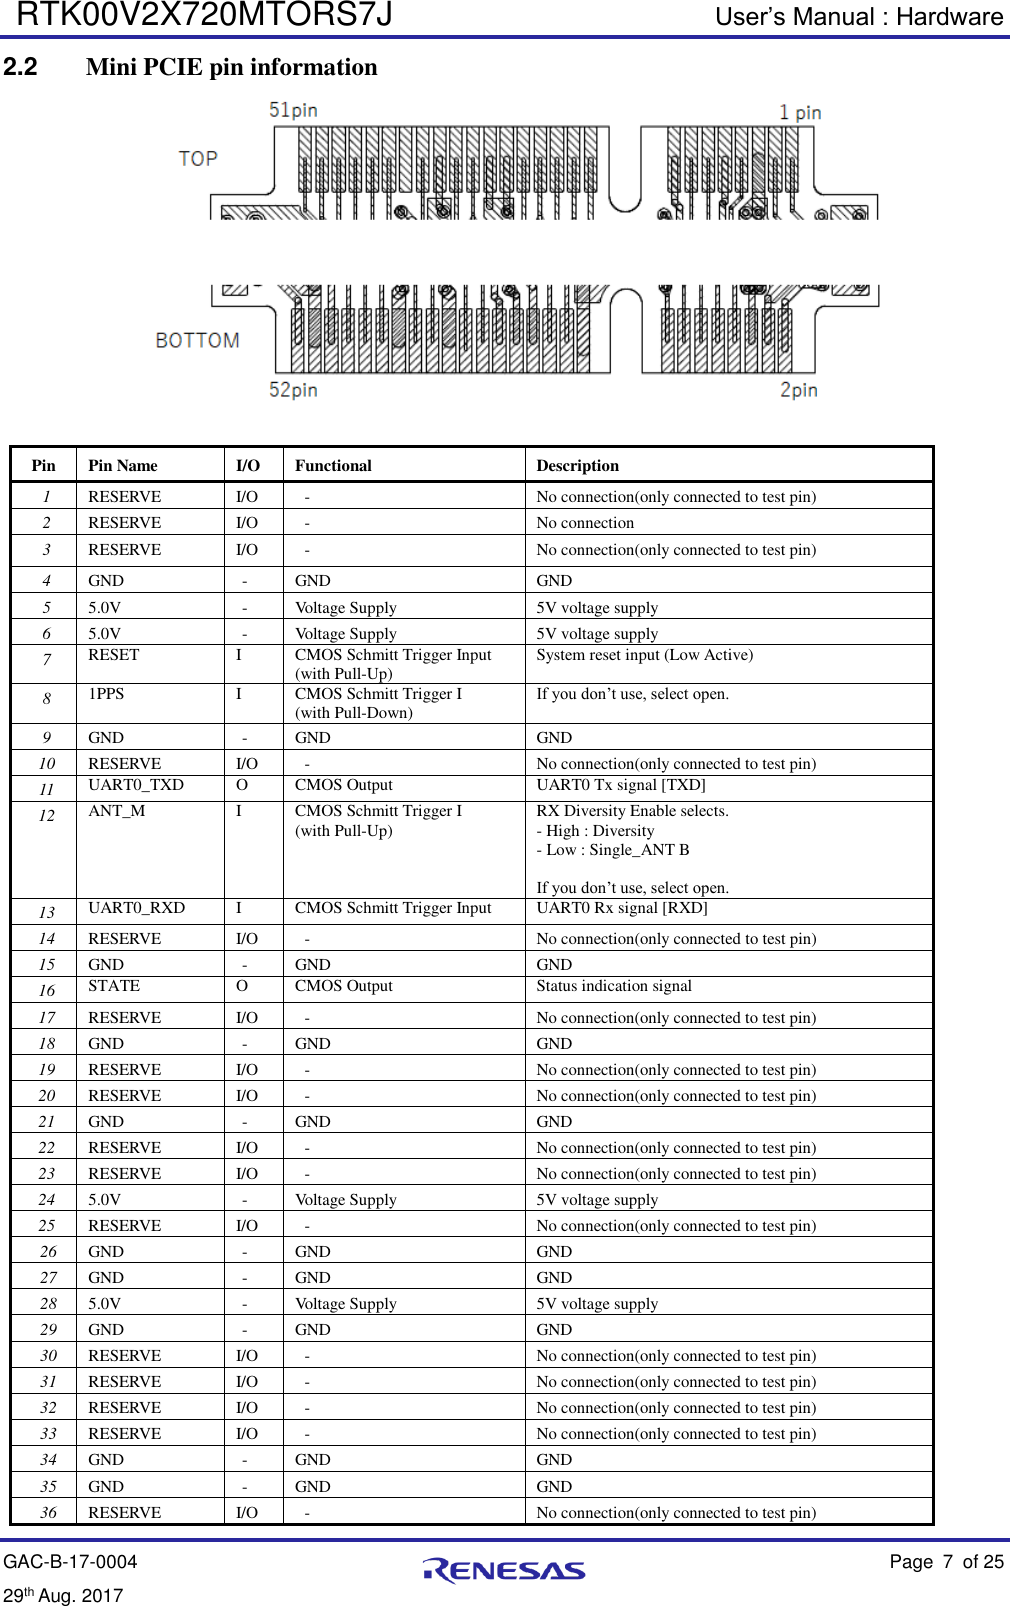  RTK00V2X720MTORS7J User’s Manual : Hardware GAC-B-17-0004    Page 7  of 25 29th Aug. 2017   2.2  Mini PCIE pin information     Pin Pin Name I/O Functional Description 1 RESERVE I/O - No connection(only connected to test pin) 2 RESERVE I/O - No connection 3 RESERVE I/O - No connection(only connected to test pin) 4 GND - GND GND 5 5.0V - Voltage Supply 5V voltage supply 6 5.0V - Voltage Supply 5V voltage supply 7 RESET   I   CMOS Schmitt Trigger Input   (with Pull-Up)   System reset input (Low Active) 8 1PPS   I   CMOS Schmitt Trigger I   (with Pull-Down)   If you don’t use, select open. 9 GND - GND GND 10 RESERVE I/O - No connection(only connected to test pin) 11 UART0_TXD   O   CMOS Output   UART0 Tx signal [TXD] 12 ANT_M   I   CMOS Schmitt Trigger I   (with Pull-Up)   RX Diversity Enable selects. - High : Diversity - Low : Single_ANT B  If you don’t use, select open. 13 UART0_RXD   I   CMOS Schmitt Trigger Input   UART0 Rx signal [RXD] 14 RESERVE I/O - No connection(only connected to test pin) 15 GND - GND GND 16 STATE   O   CMOS Output   Status indication signal 17 RESERVE I/O - No connection(only connected to test pin) 18 GND - GND GND 19 RESERVE I/O - No connection(only connected to test pin) 20 RESERVE I/O - No connection(only connected to test pin) 21 GND - GND GND 22 RESERVE I/O - No connection(only connected to test pin) 23 RESERVE I/O - No connection(only connected to test pin) 24 5.0V - Voltage Supply 5V voltage supply 25 RESERVE I/O - No connection(only connected to test pin) 26 GND - GND GND 27 GND - GND GND 28 5.0V - Voltage Supply 5V voltage supply 29 GND - GND GND 30 RESERVE I/O - No connection(only connected to test pin) 31 RESERVE I/O - No connection(only connected to test pin) 32 RESERVE I/O - No connection(only connected to test pin) 33 RESERVE I/O - No connection(only connected to test pin) 34 GND - GND GND 35 GND - GND GND 36 RESERVE I/O - No connection(only connected to test pin) 